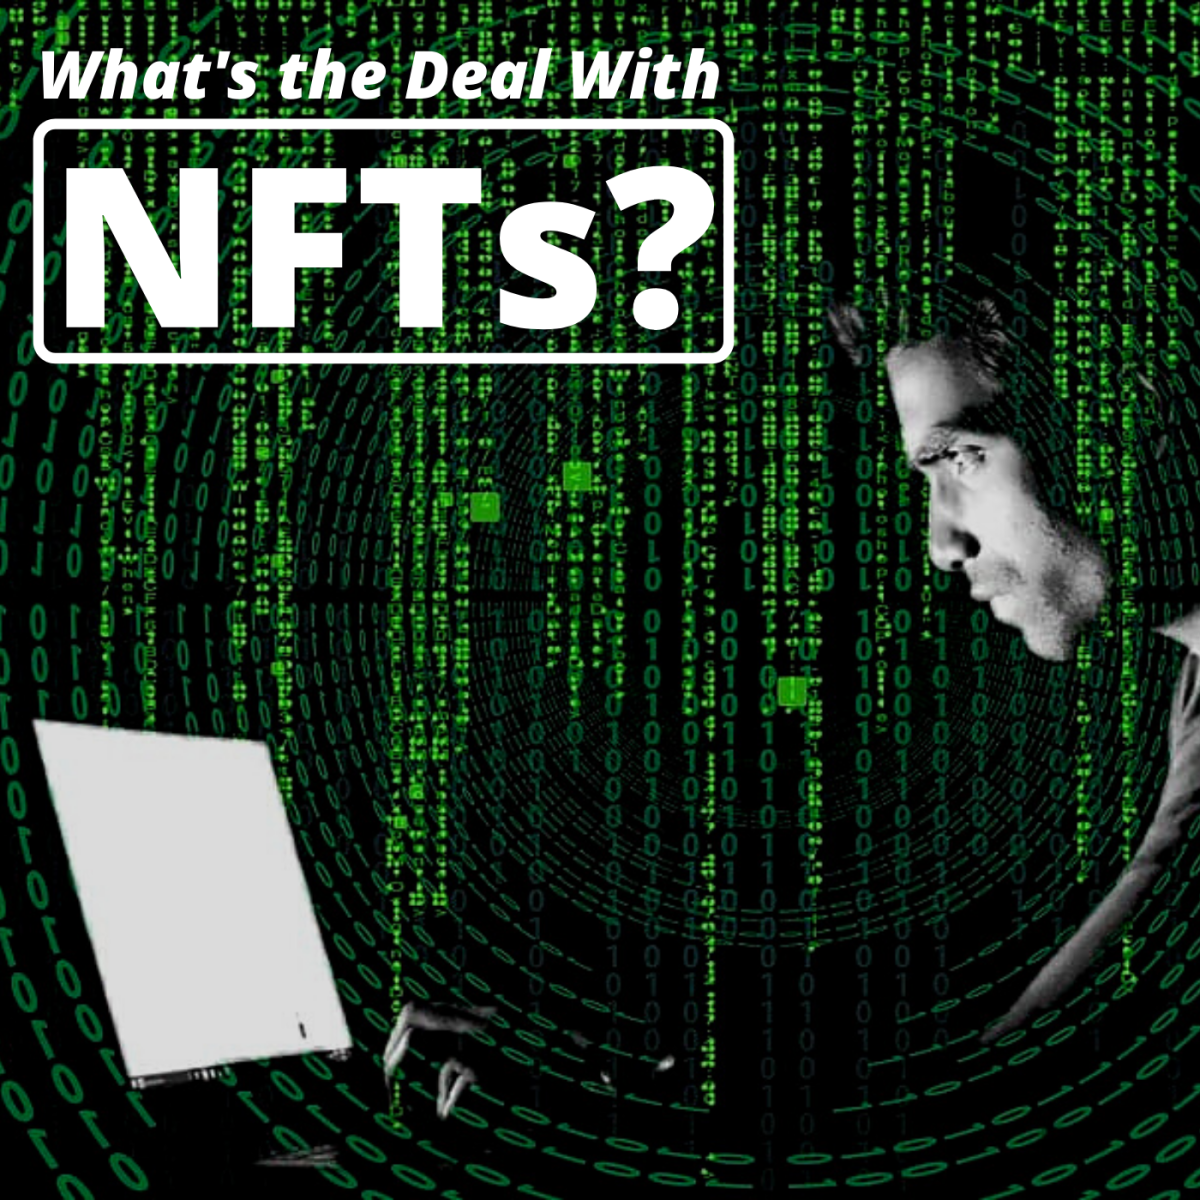 The Madness of Non-Fungible Tokens (NFTs)